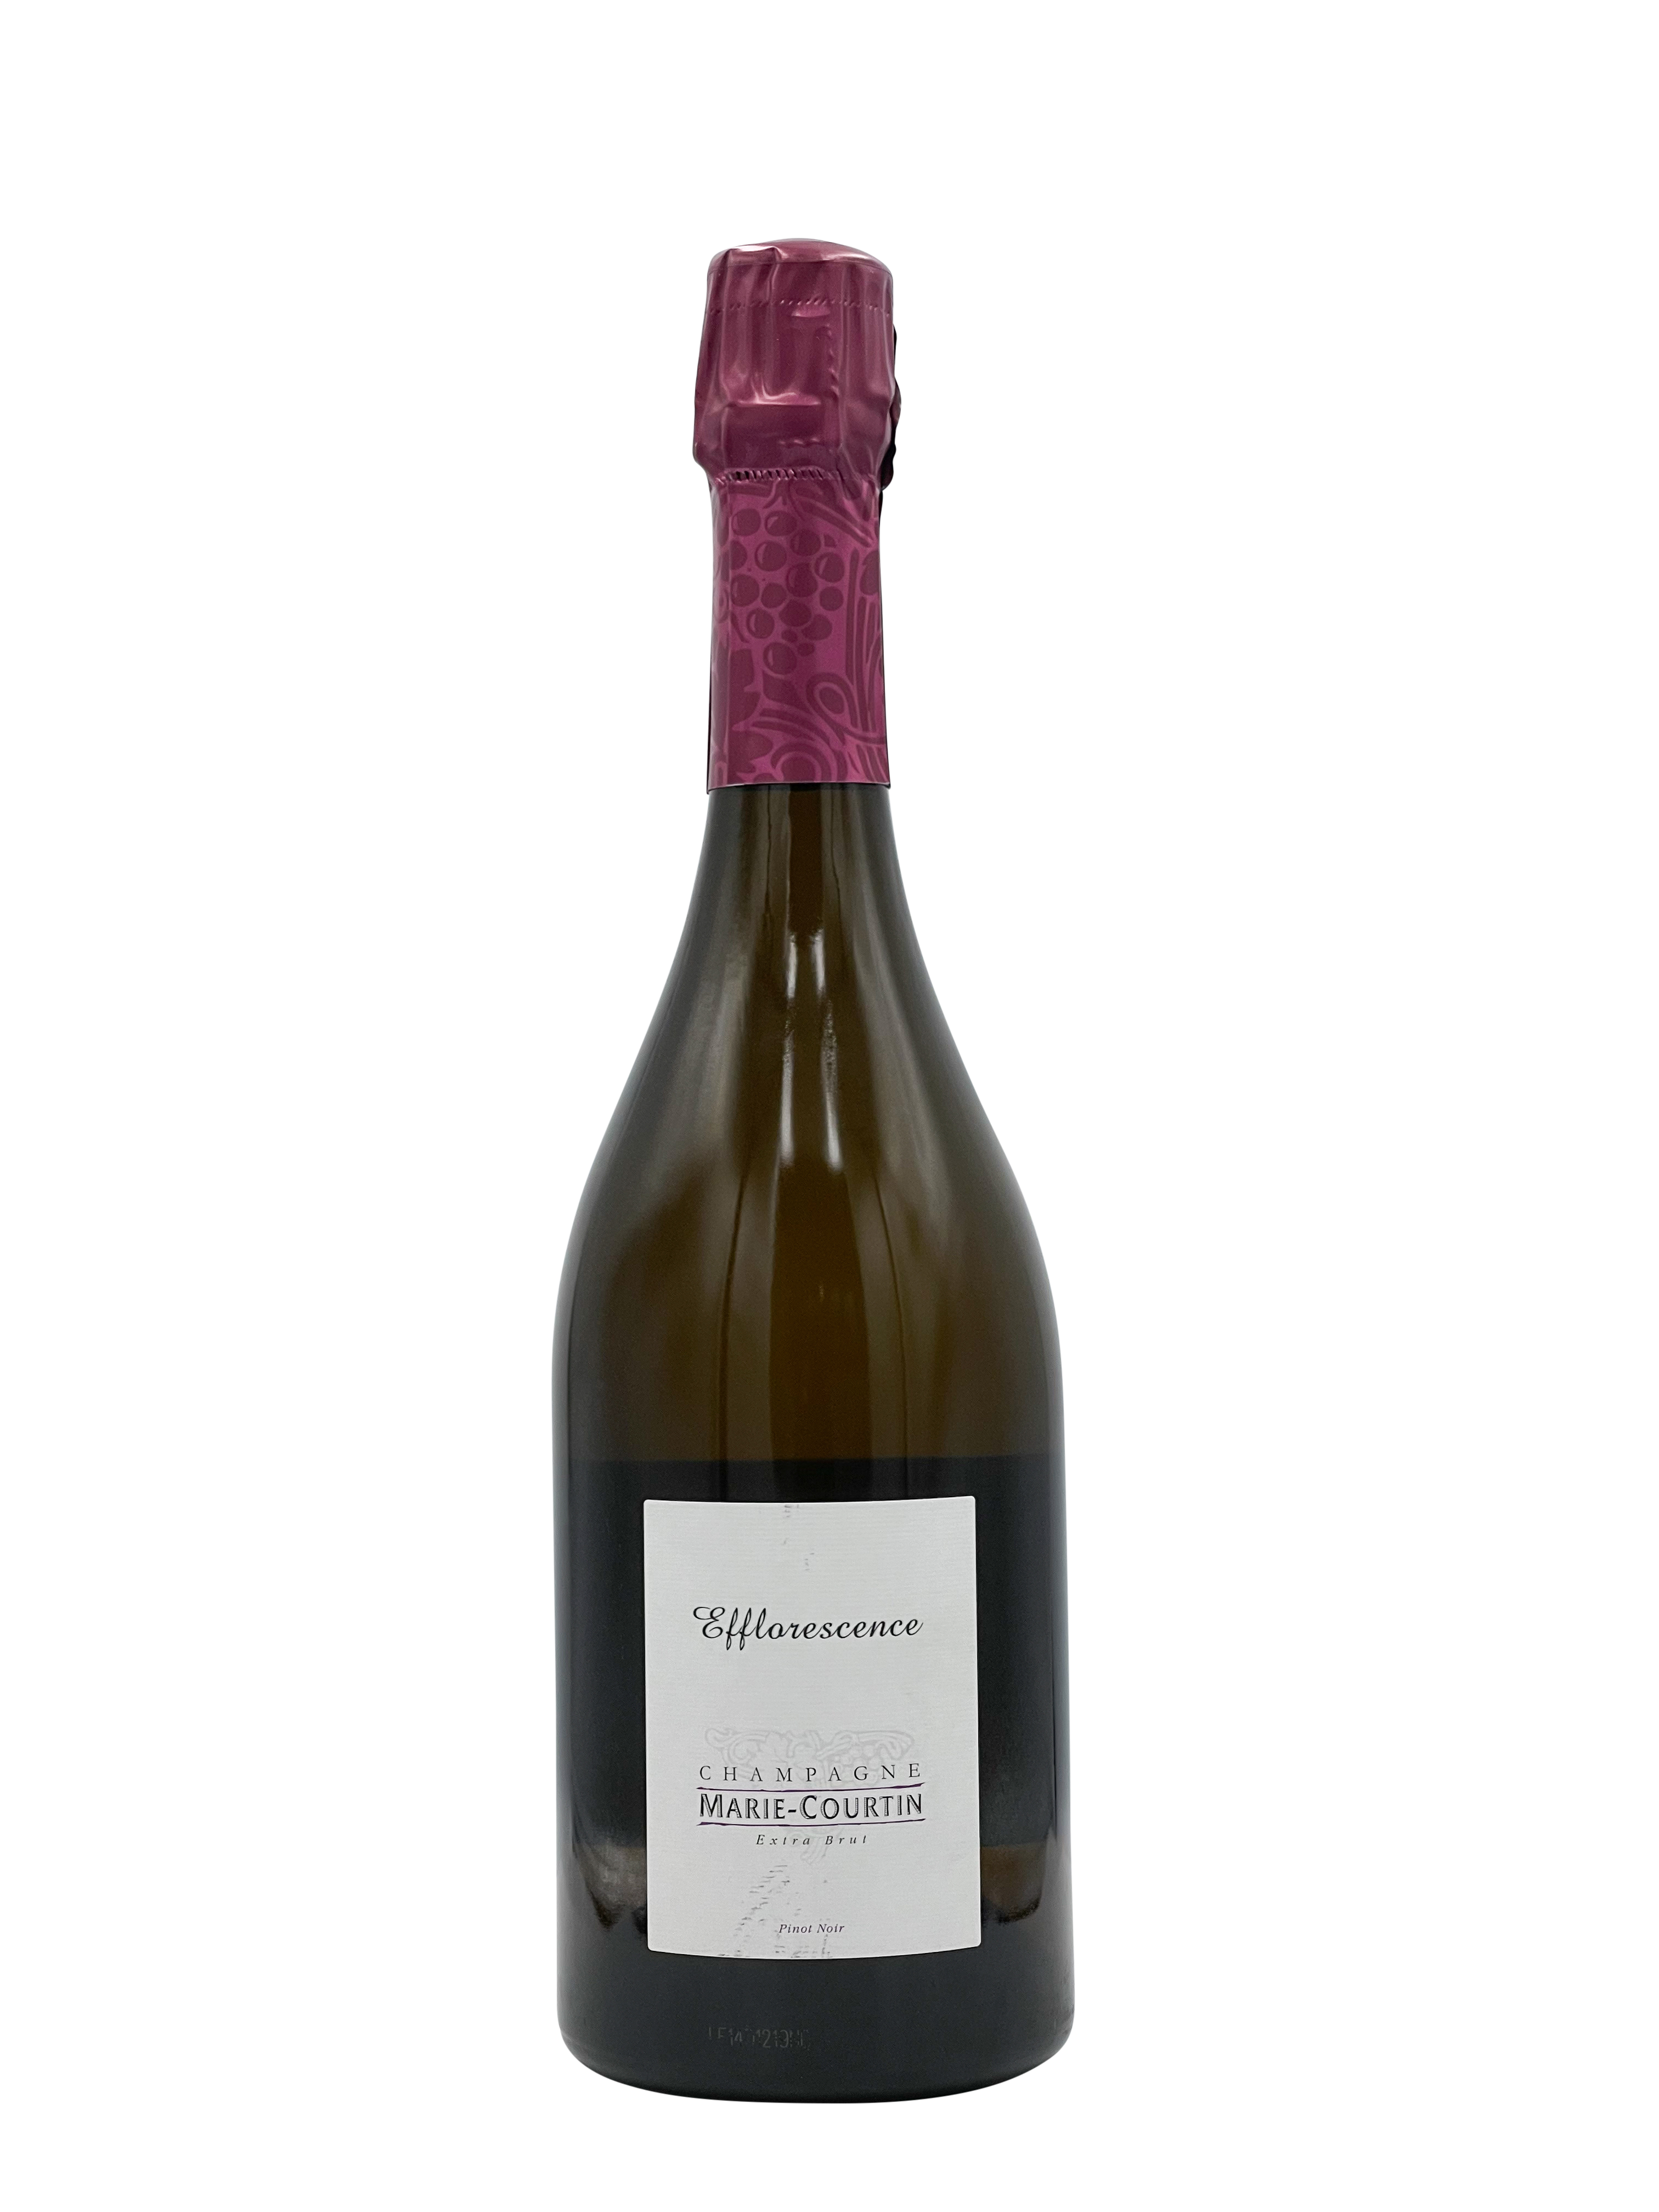 Marie-Courtin Champagne "Efflorescence" Extra-Brut (2014)